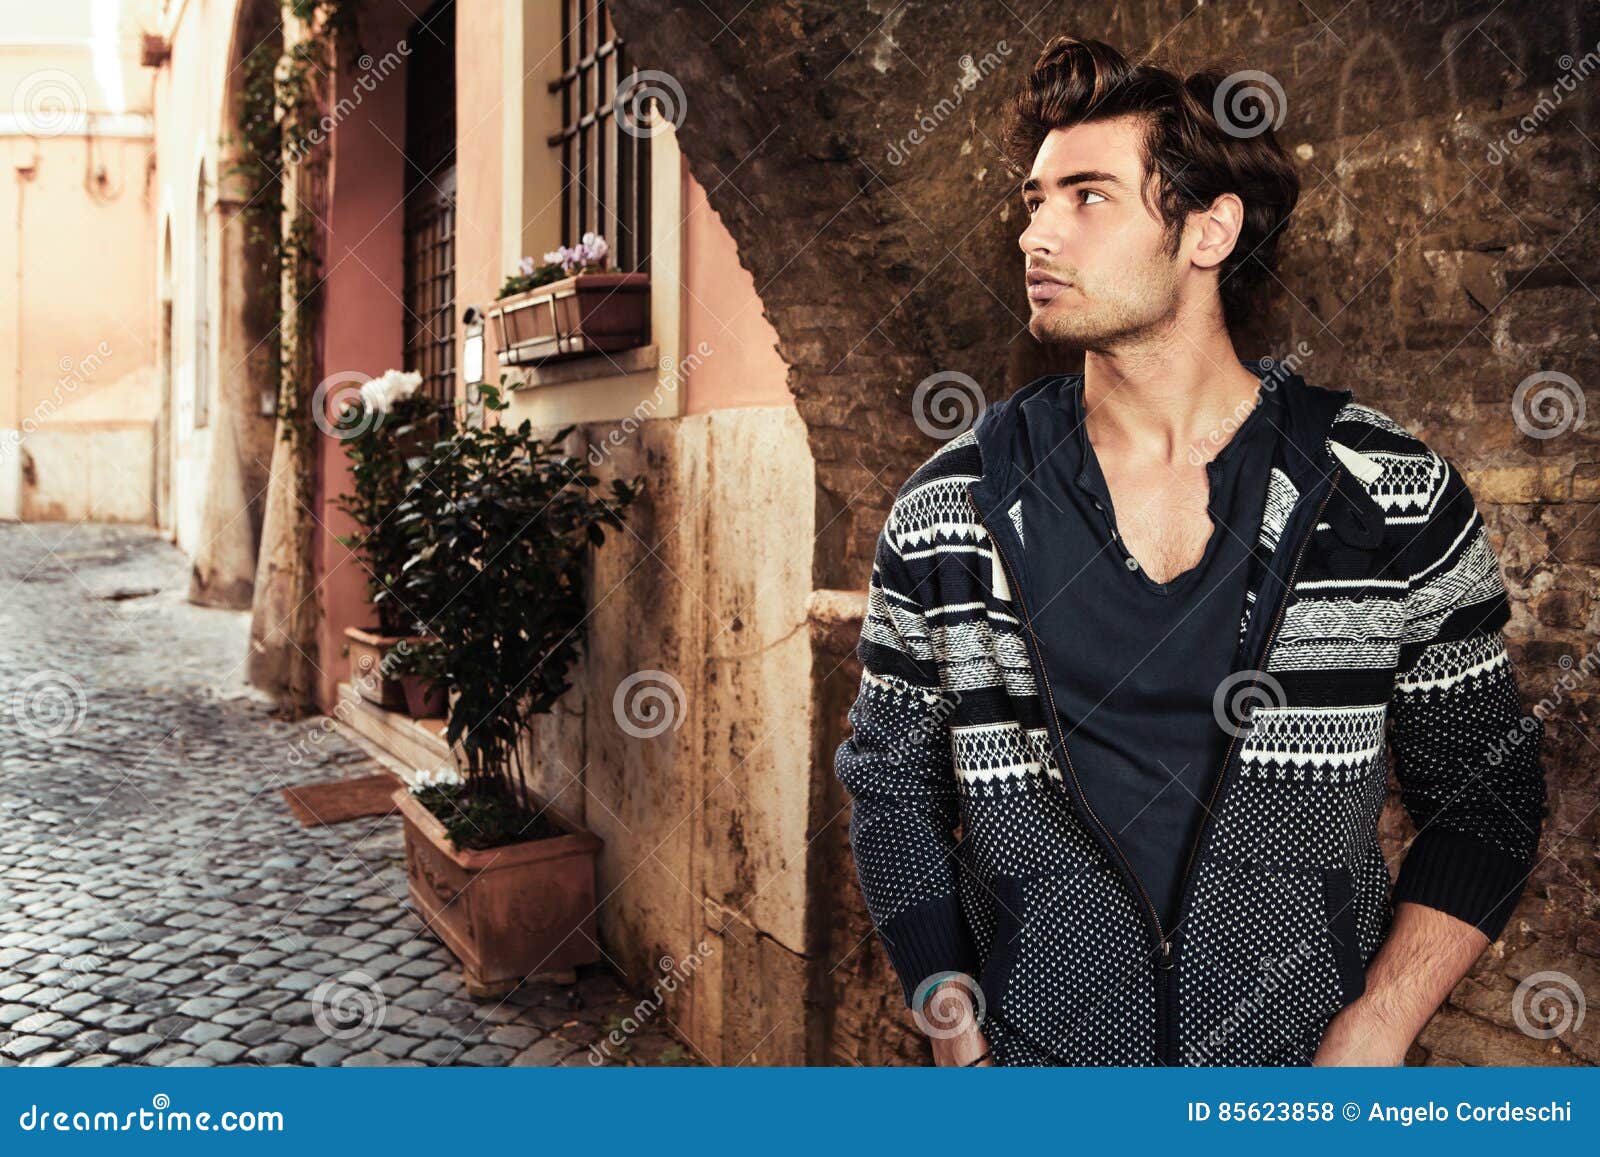 handsome young man in the city. waiting in the street.